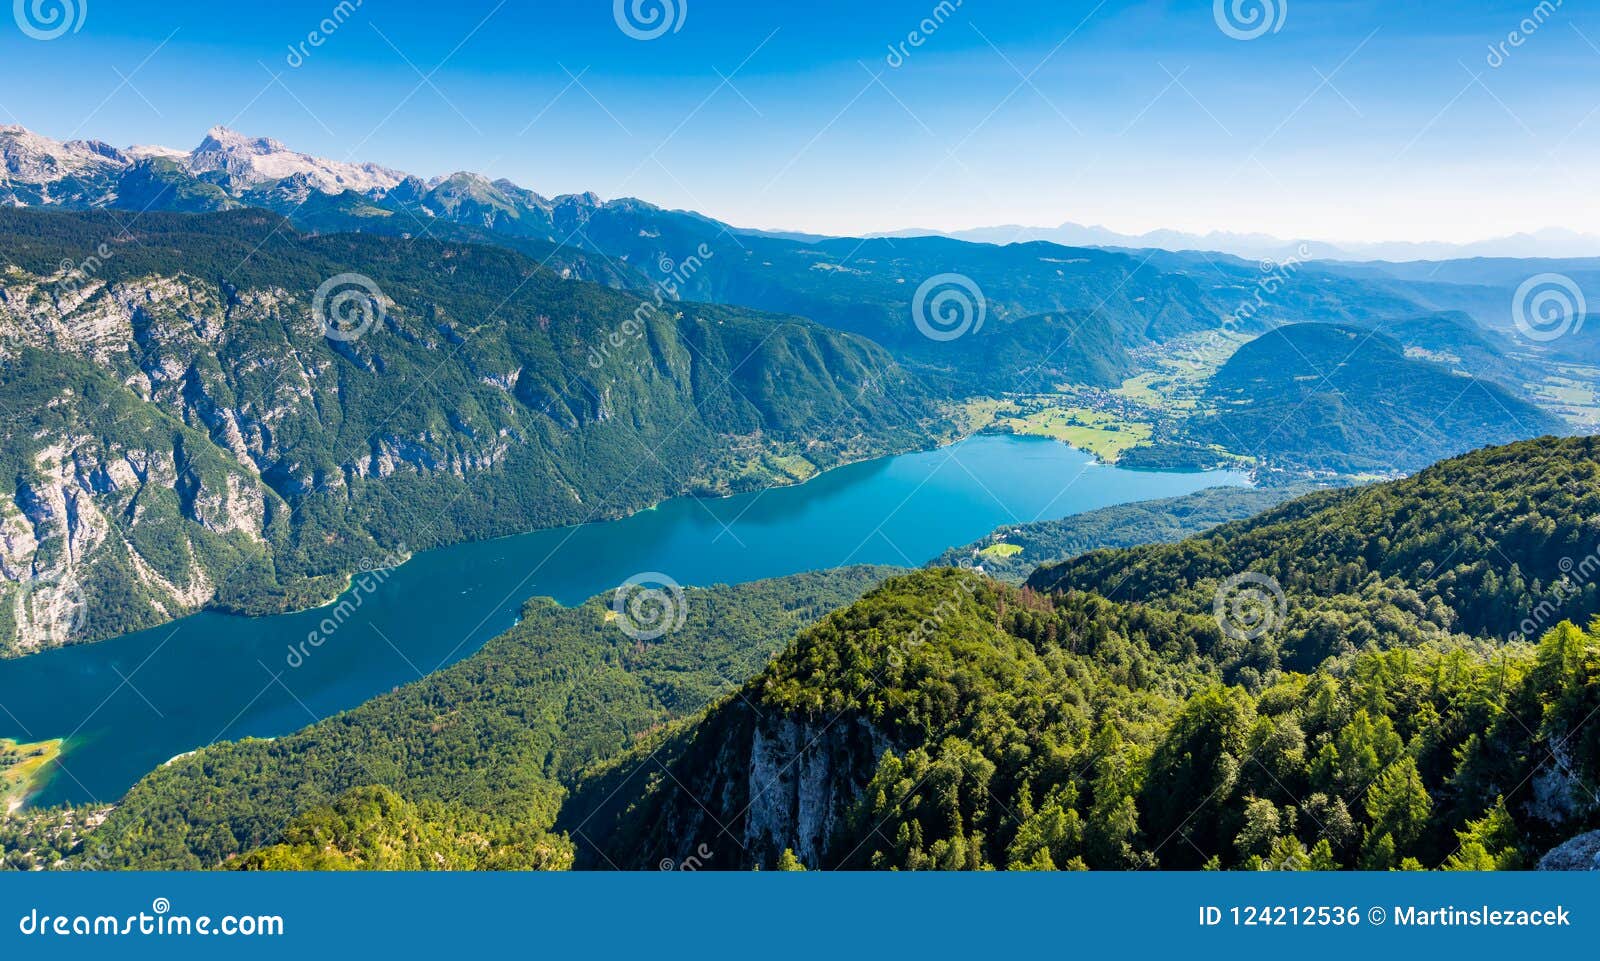 aerial view of bohinj lake from vogel cable car station. mountains of slovenia in triglav national park. julian alps landscape. bl